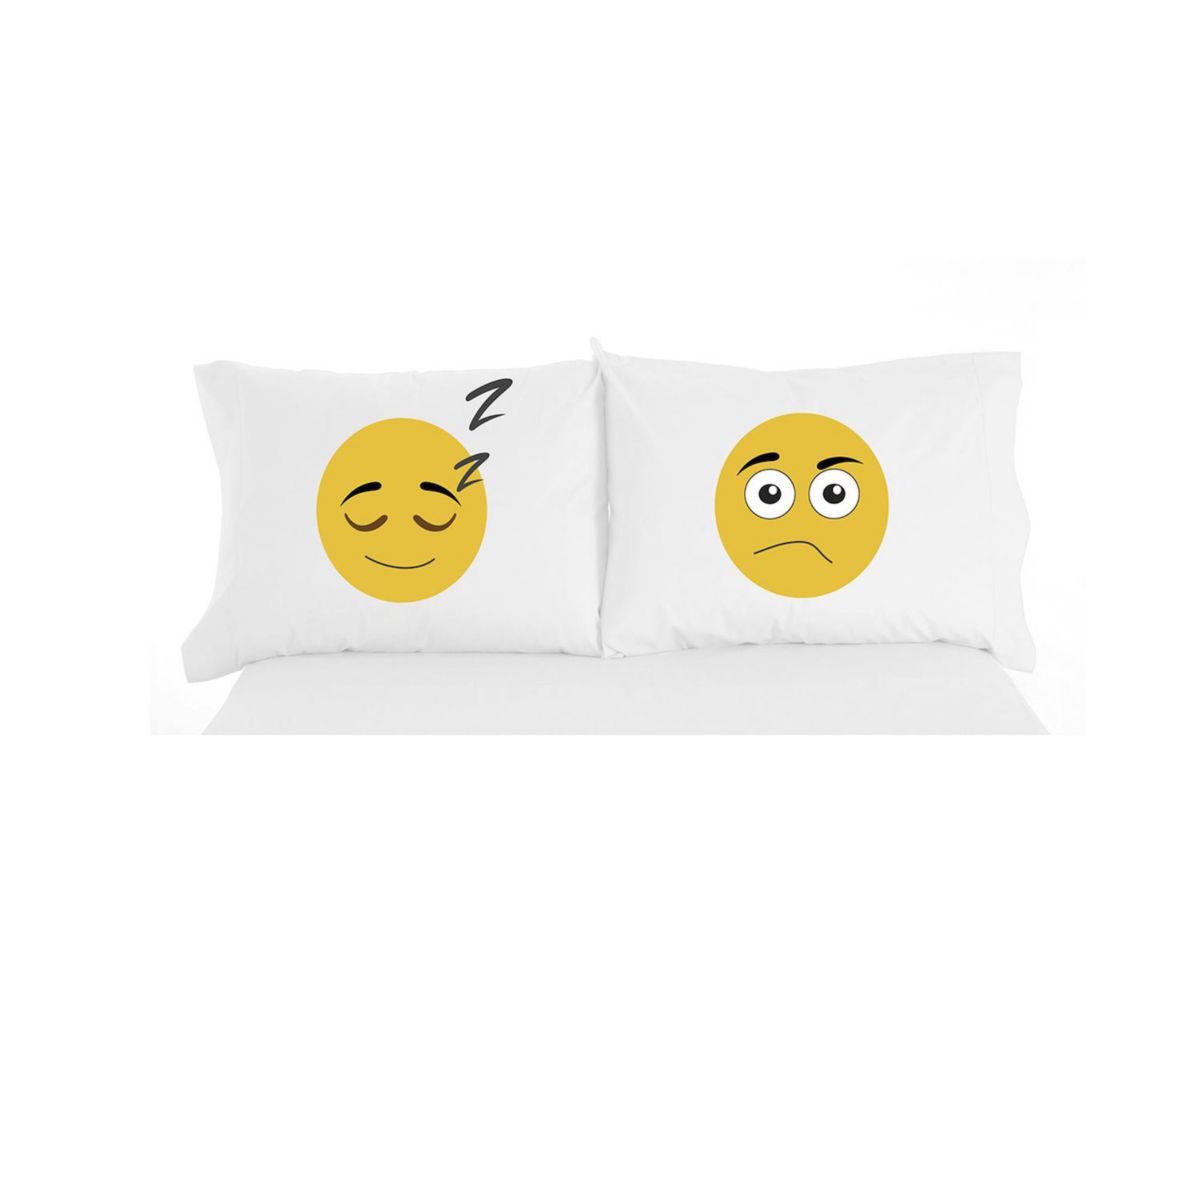 Micro Flannel High Quality 2-Piece Exclusively Emoji Printed Luxurious Pillowcase Shavel